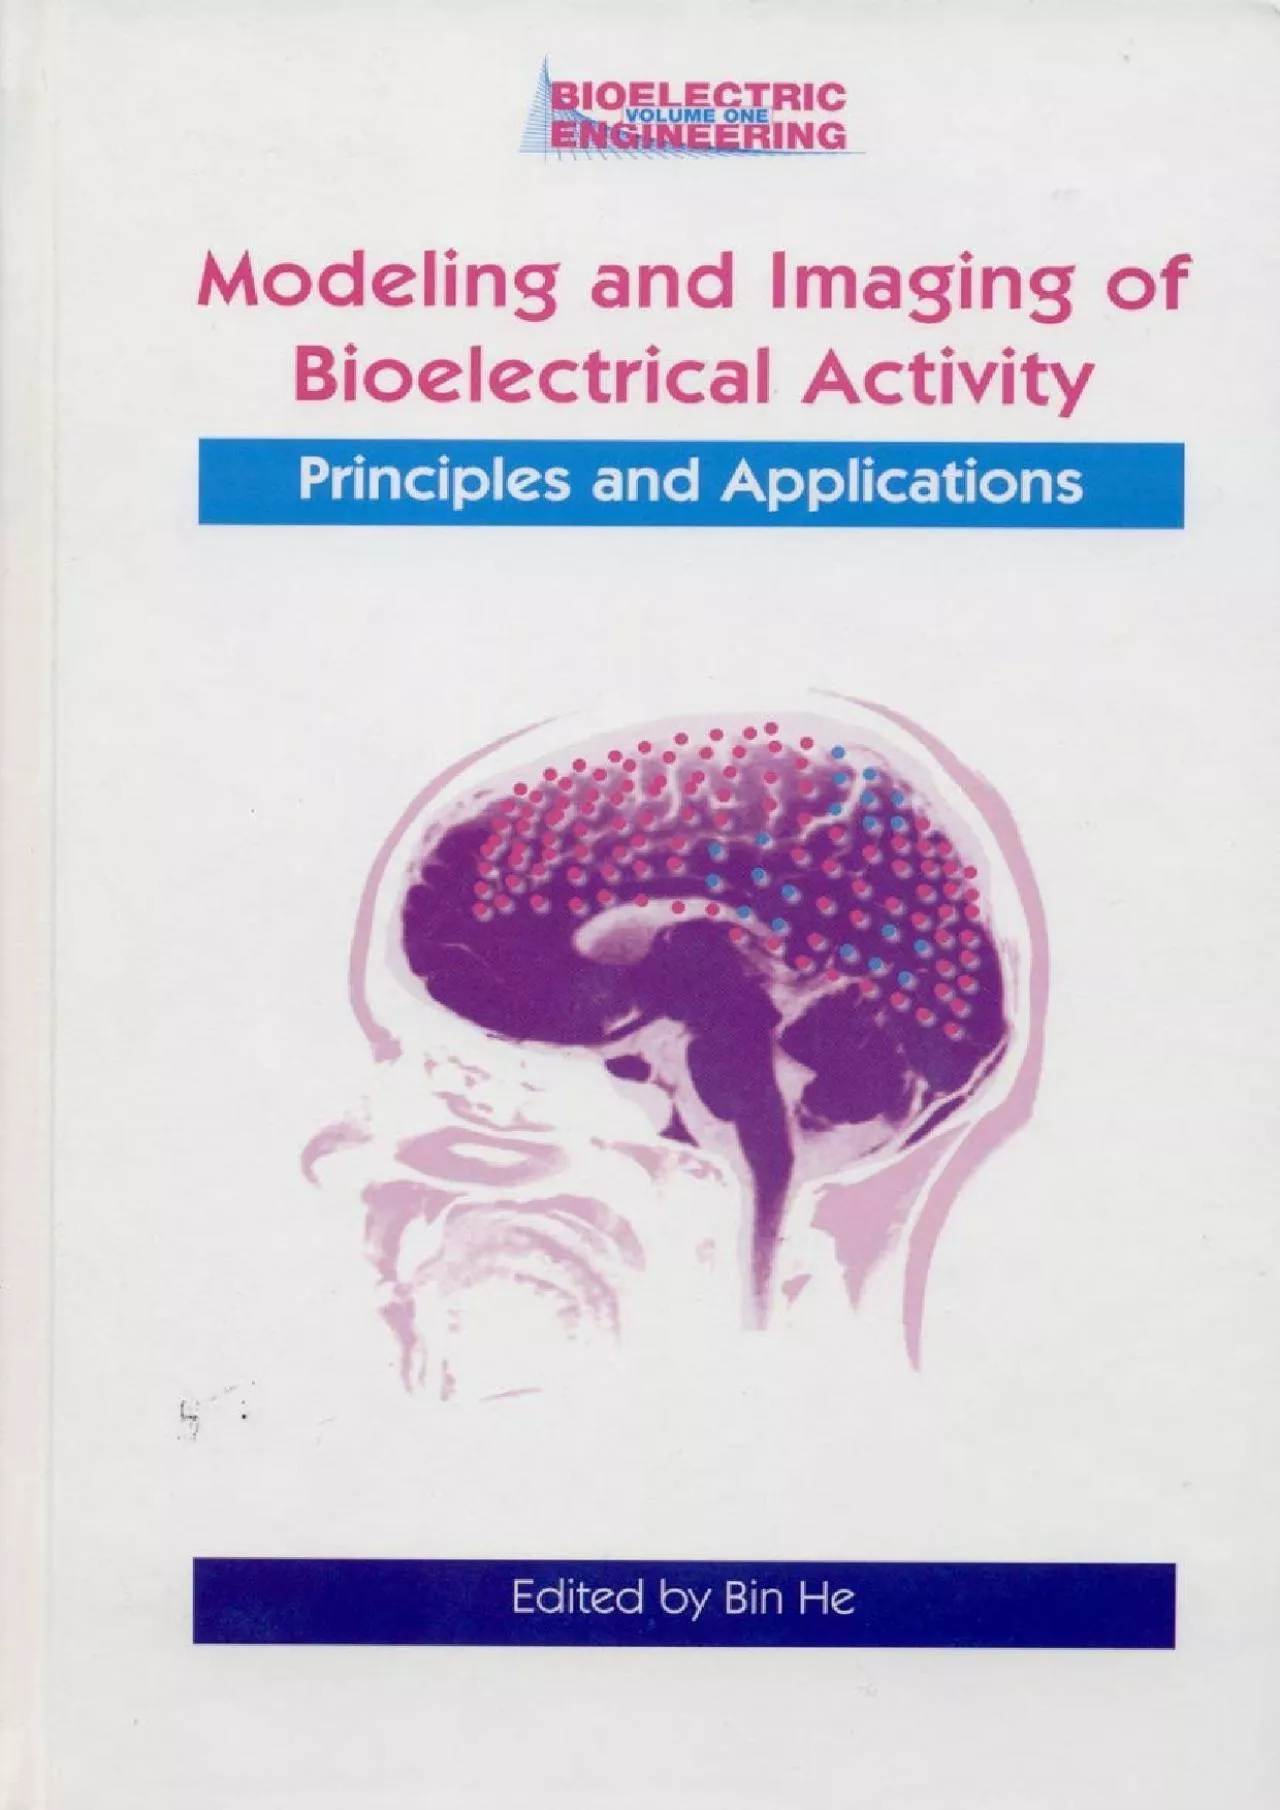 (BOOK)-Modeling & Imaging of Bioelectrical Activity: Principles and Applications (Bioelectric